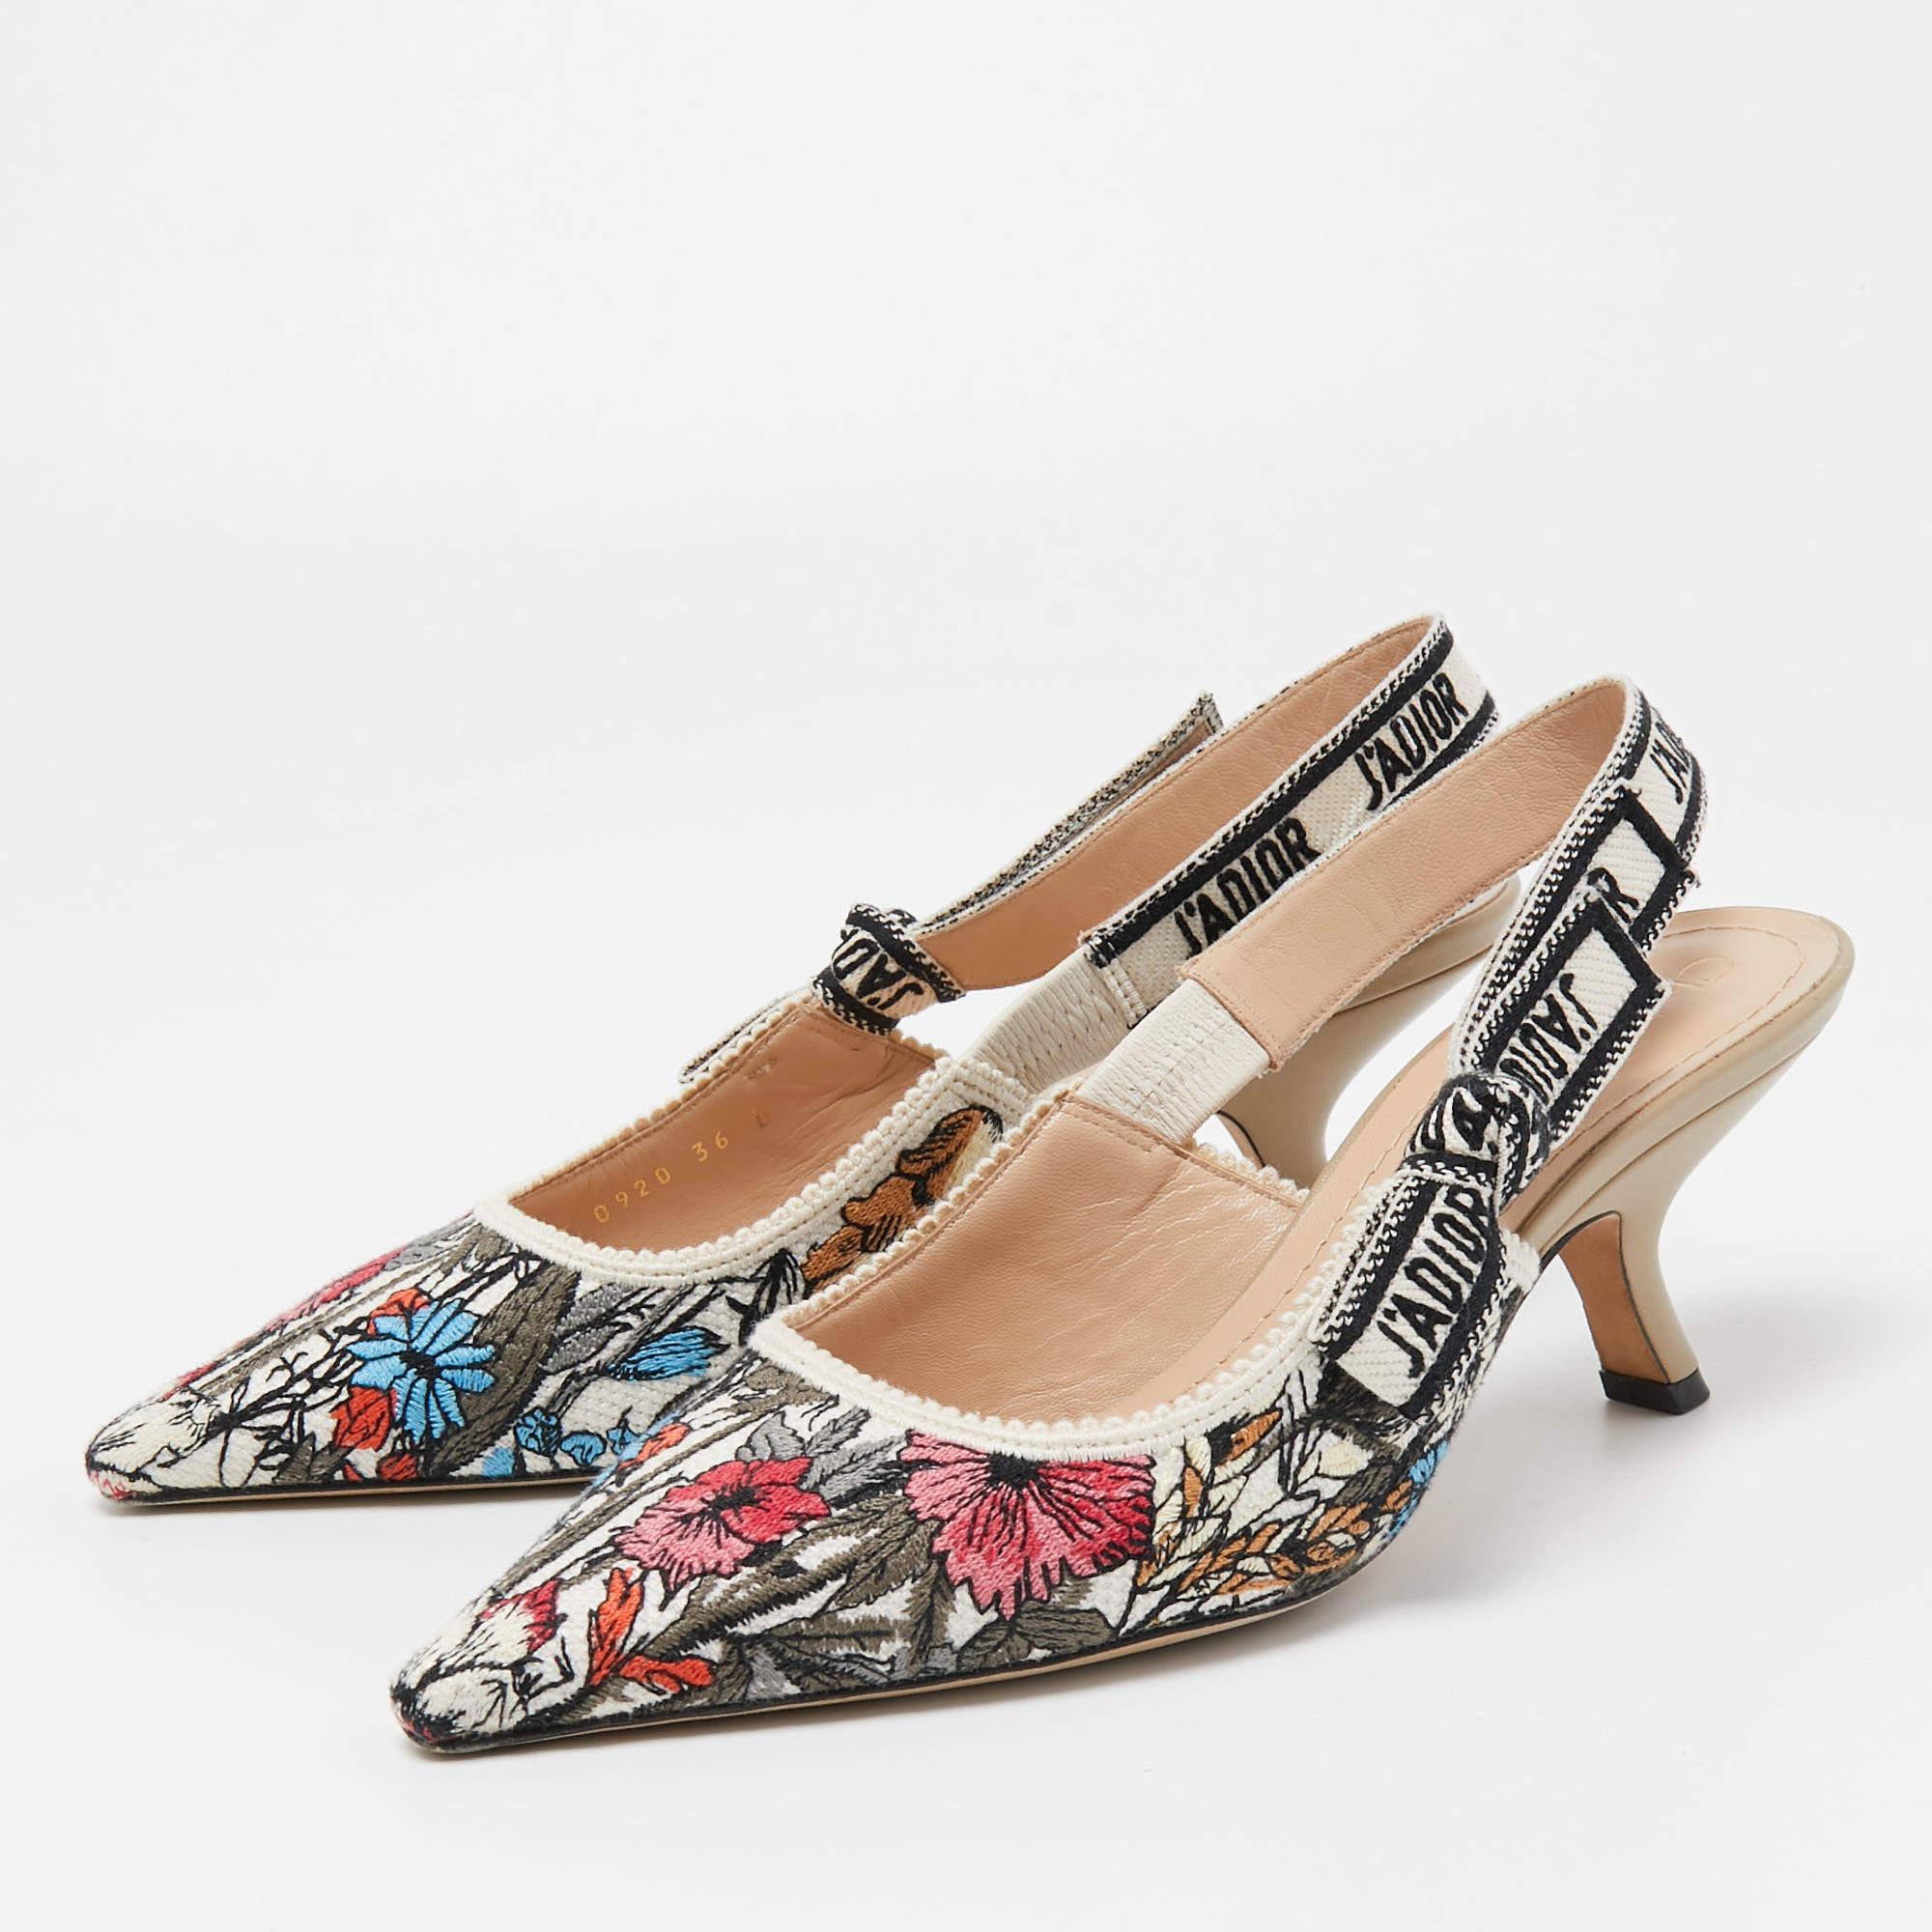 Women's Christian Dior Multicolor Floral Embroidered Canvas J'adior Slingback Pumps Size